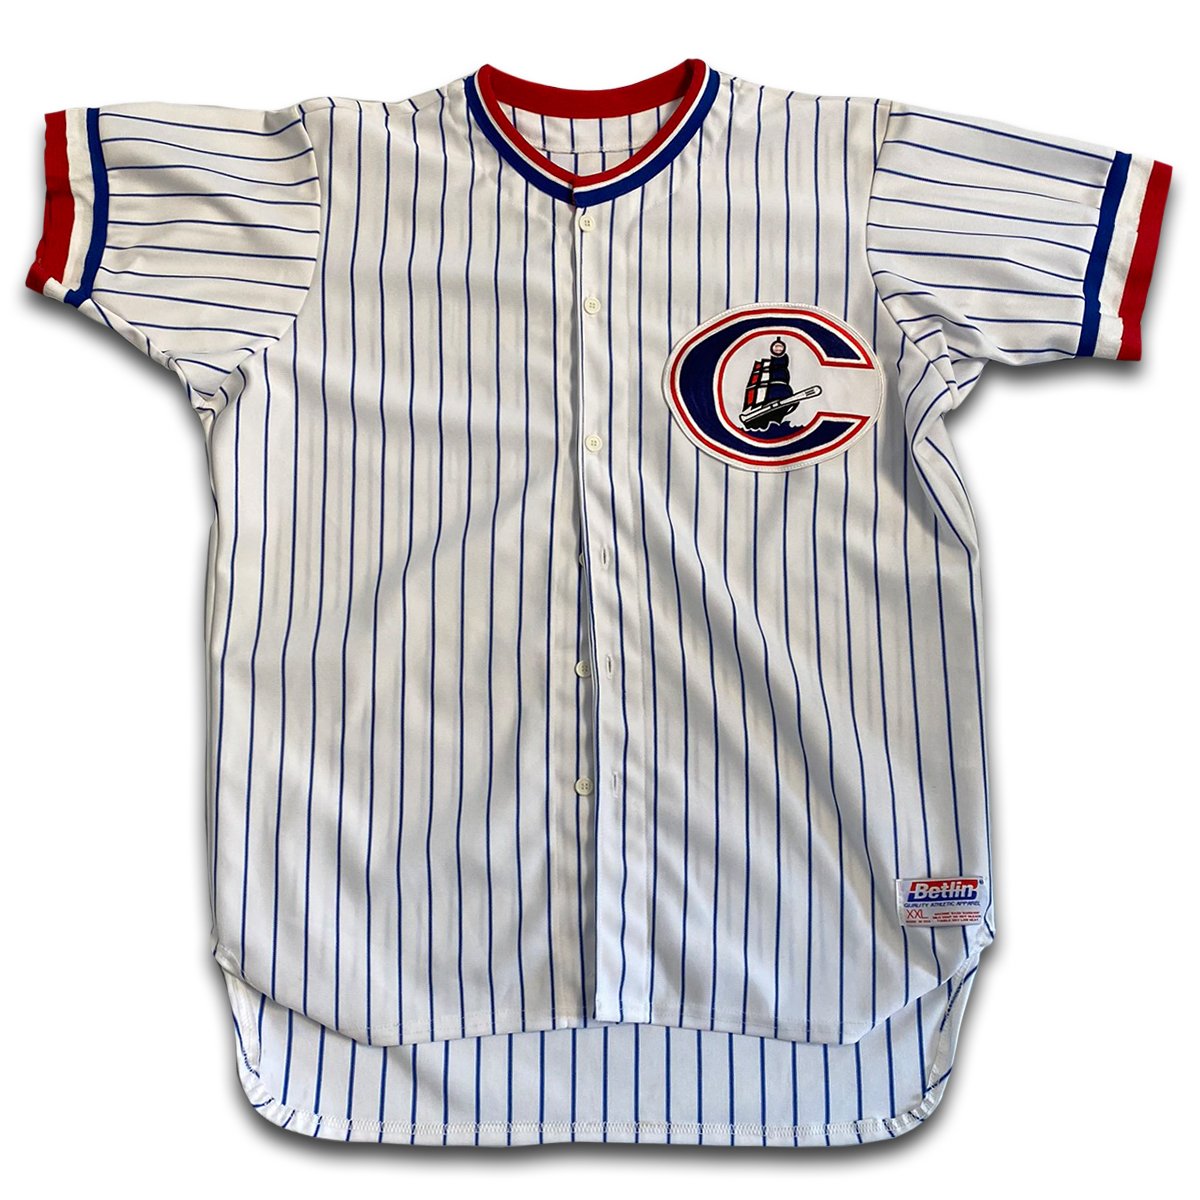 retro clippers jersey